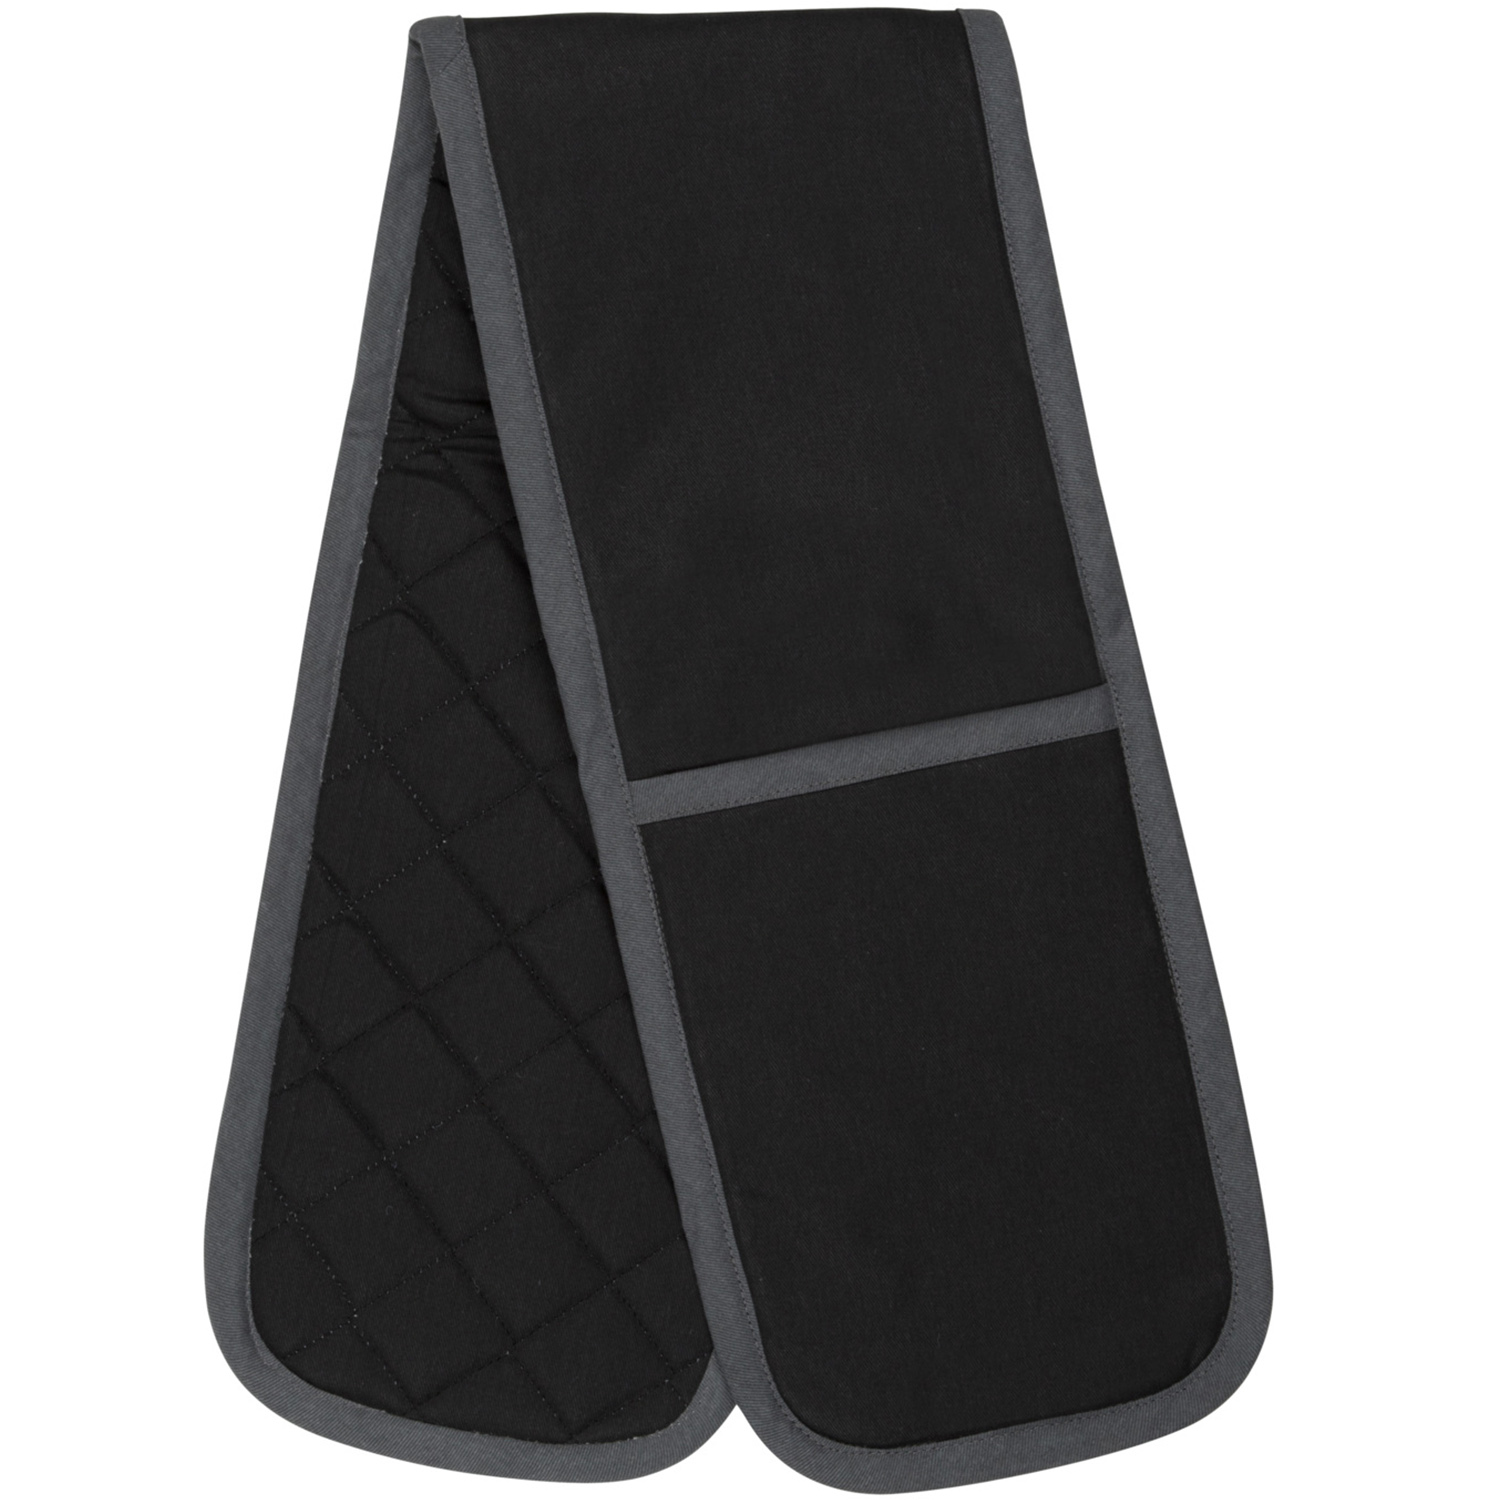 My Home Black Double Oven Glove Image